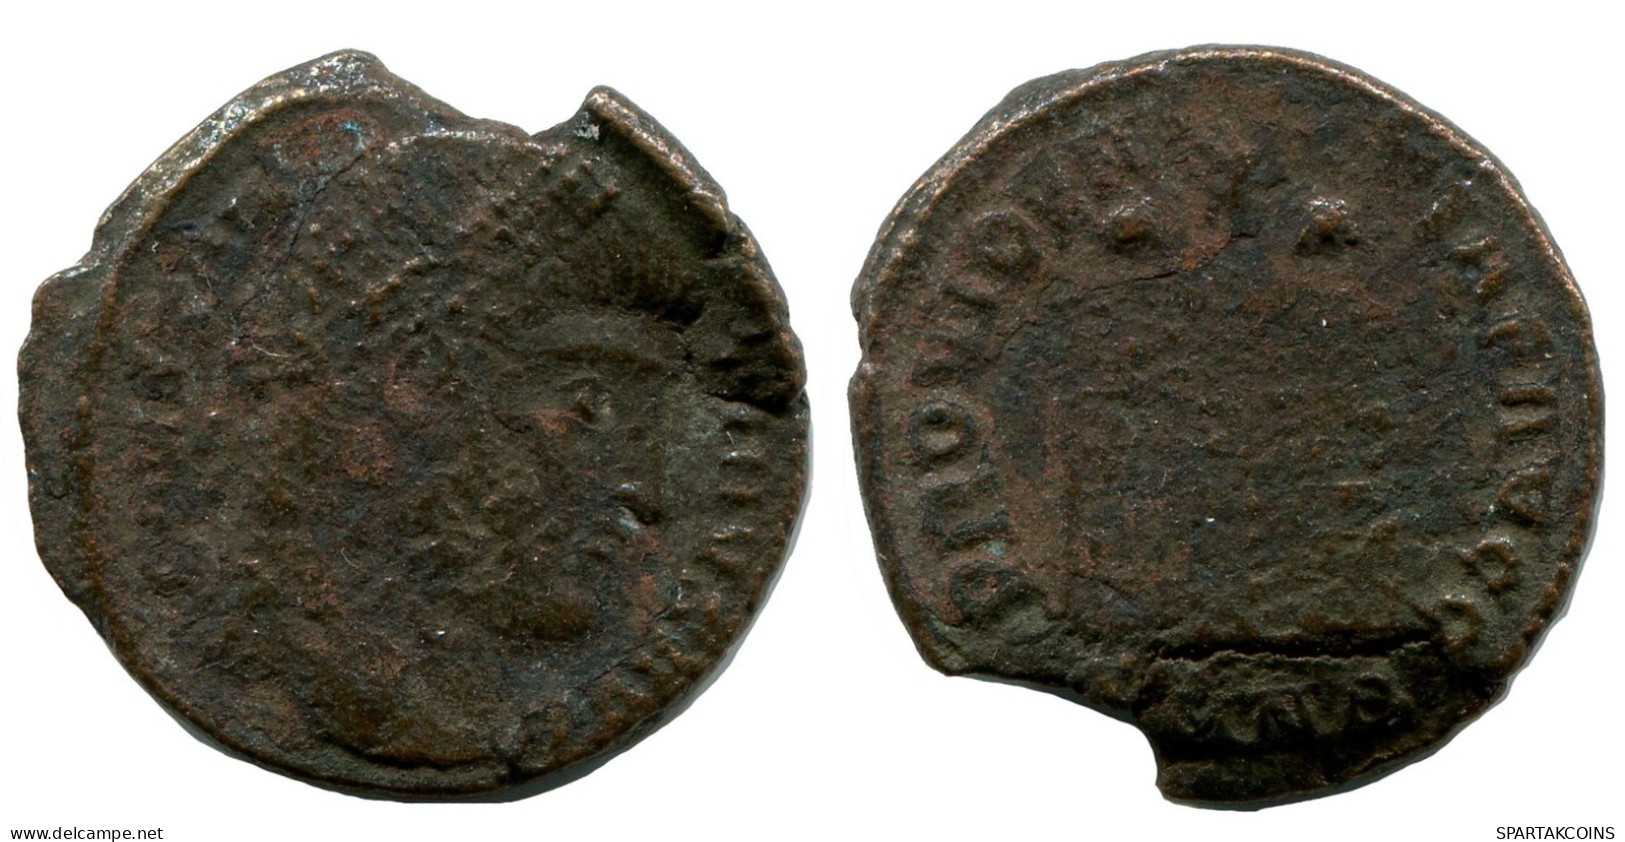 CONSTANTINE I MINTED IN NICOMEDIA FOUND IN IHNASYAH HOARD EGYPT #ANC10921.14.E.A - The Christian Empire (307 AD Tot 363 AD)